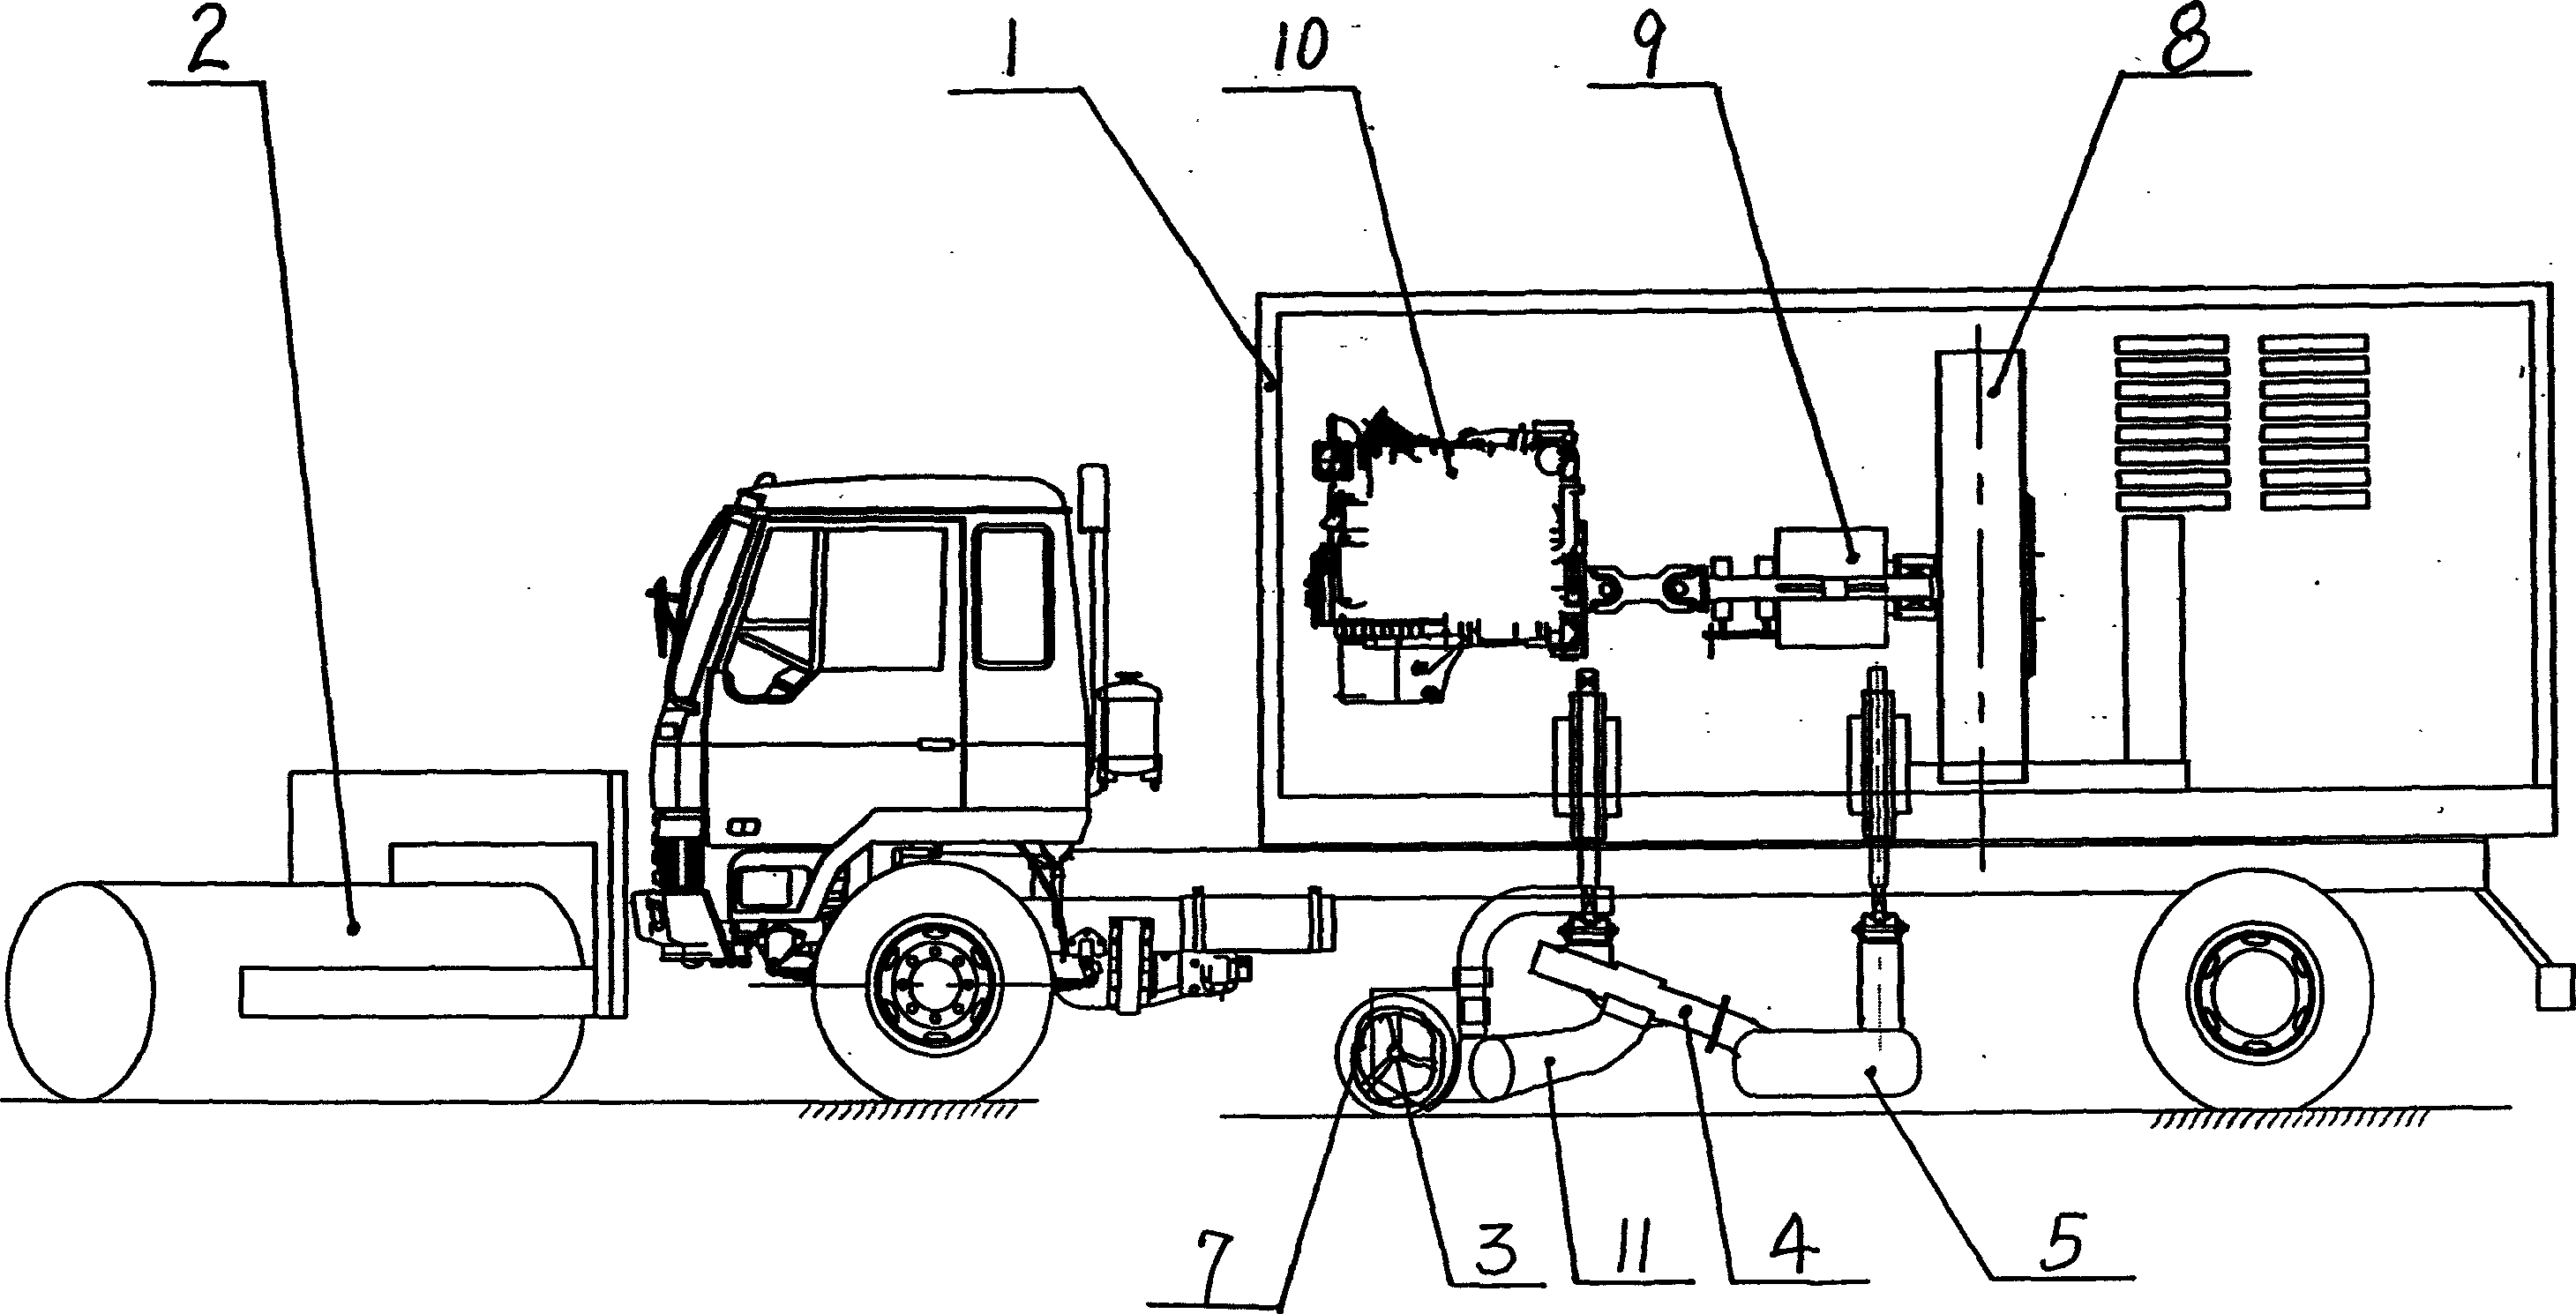 Combined snow cleaning method by sweeping, suction and blowing